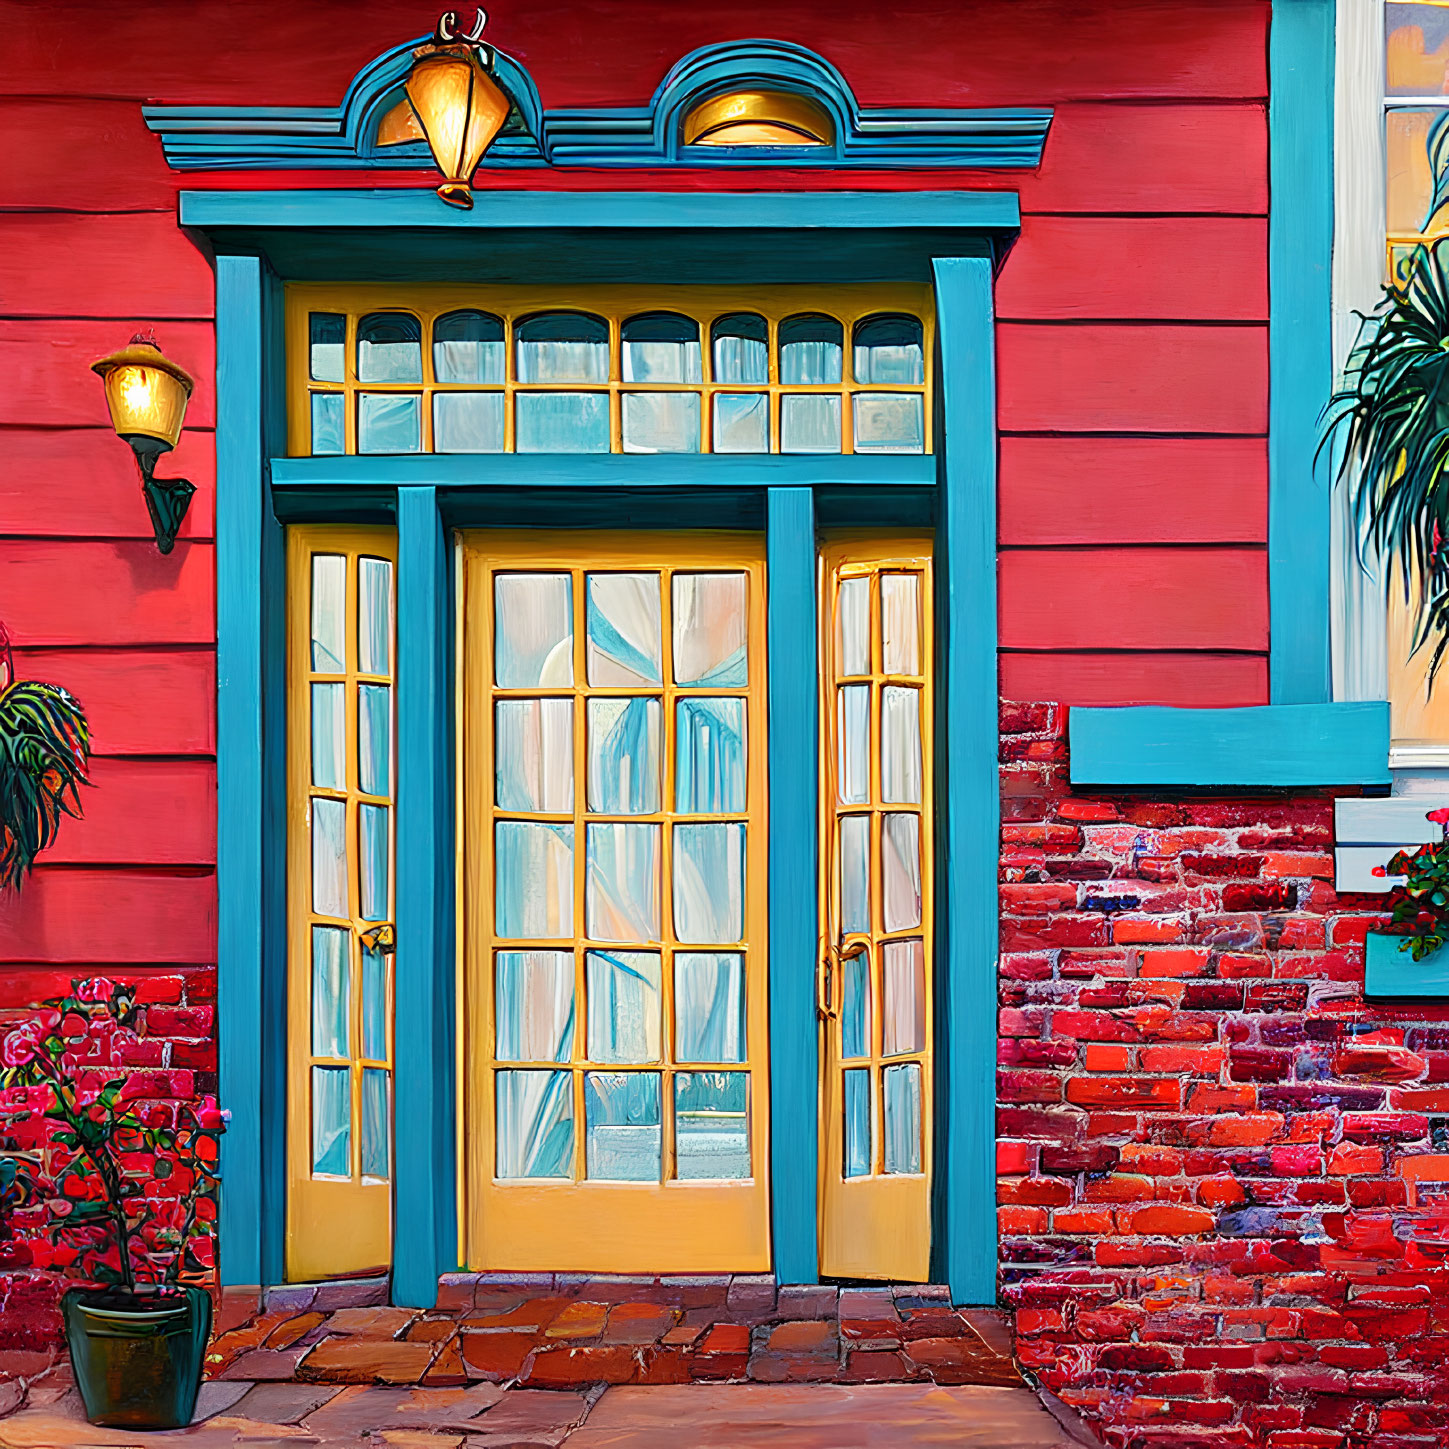 Colorful painting of blue and yellow door in red brick wall with lanterns and potted plant